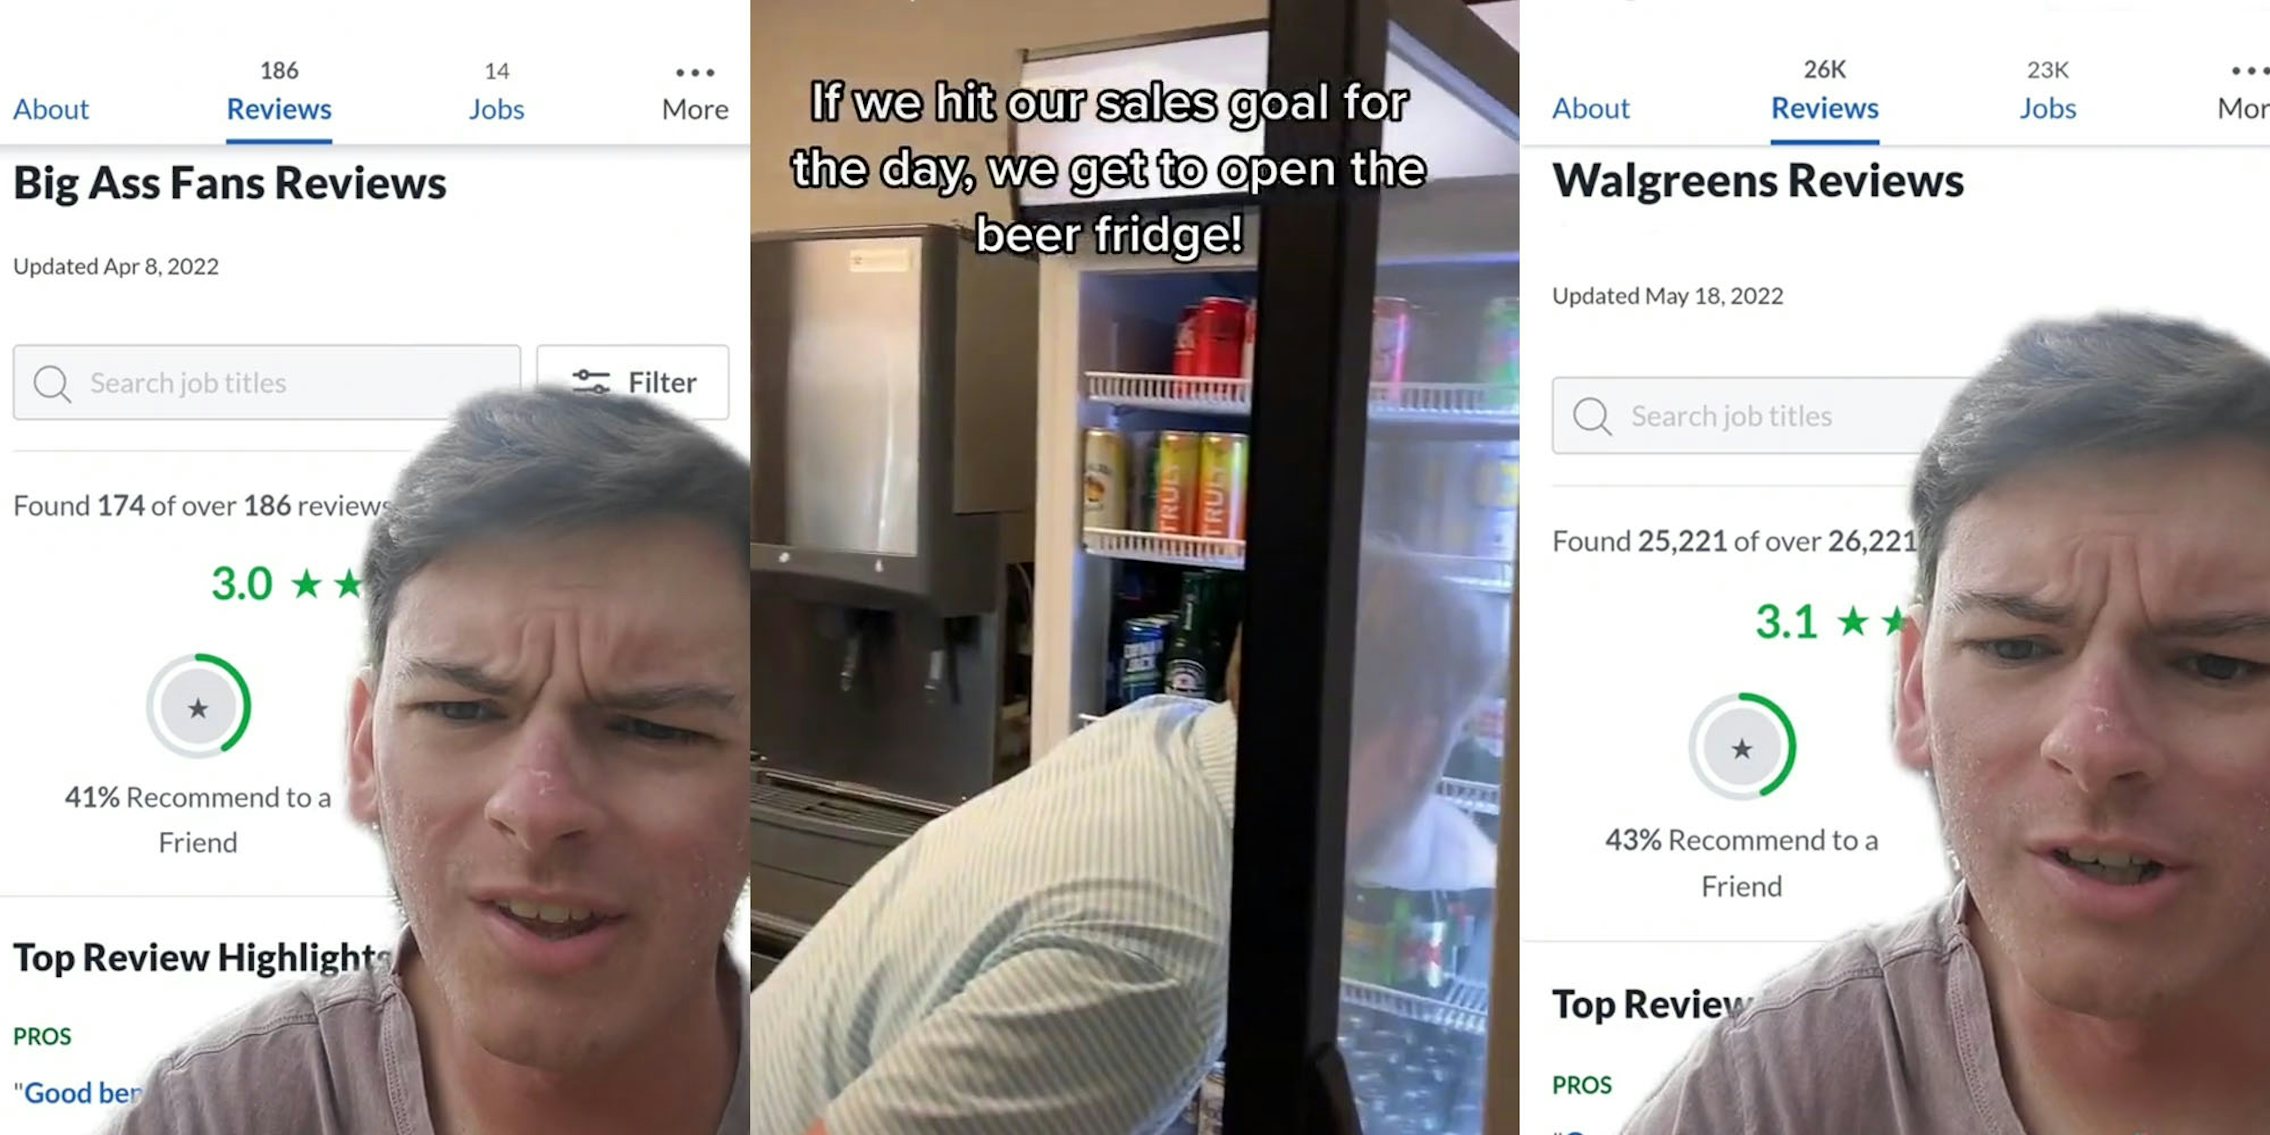 man greenscreen TikTok over Glassdoor reviews of Big Ass Fans 'Big Ass Fans Reviews' 'Found 174 of over 186 reviews' '3.0 stars 41% Recommended to a Friend' (l) Man ducking into open fridge grabbing a beverage caption 'If we hit our sales goal for the day, we get to open the beer fridge!' (c) Man greenscreen TikTok over Glassdoor reviews of Walgreens 'Walgreens Reviews' 'Found 25,000 of over 26,221 Reviews' '3.1 stars 43% Recommend to a friend' (r)